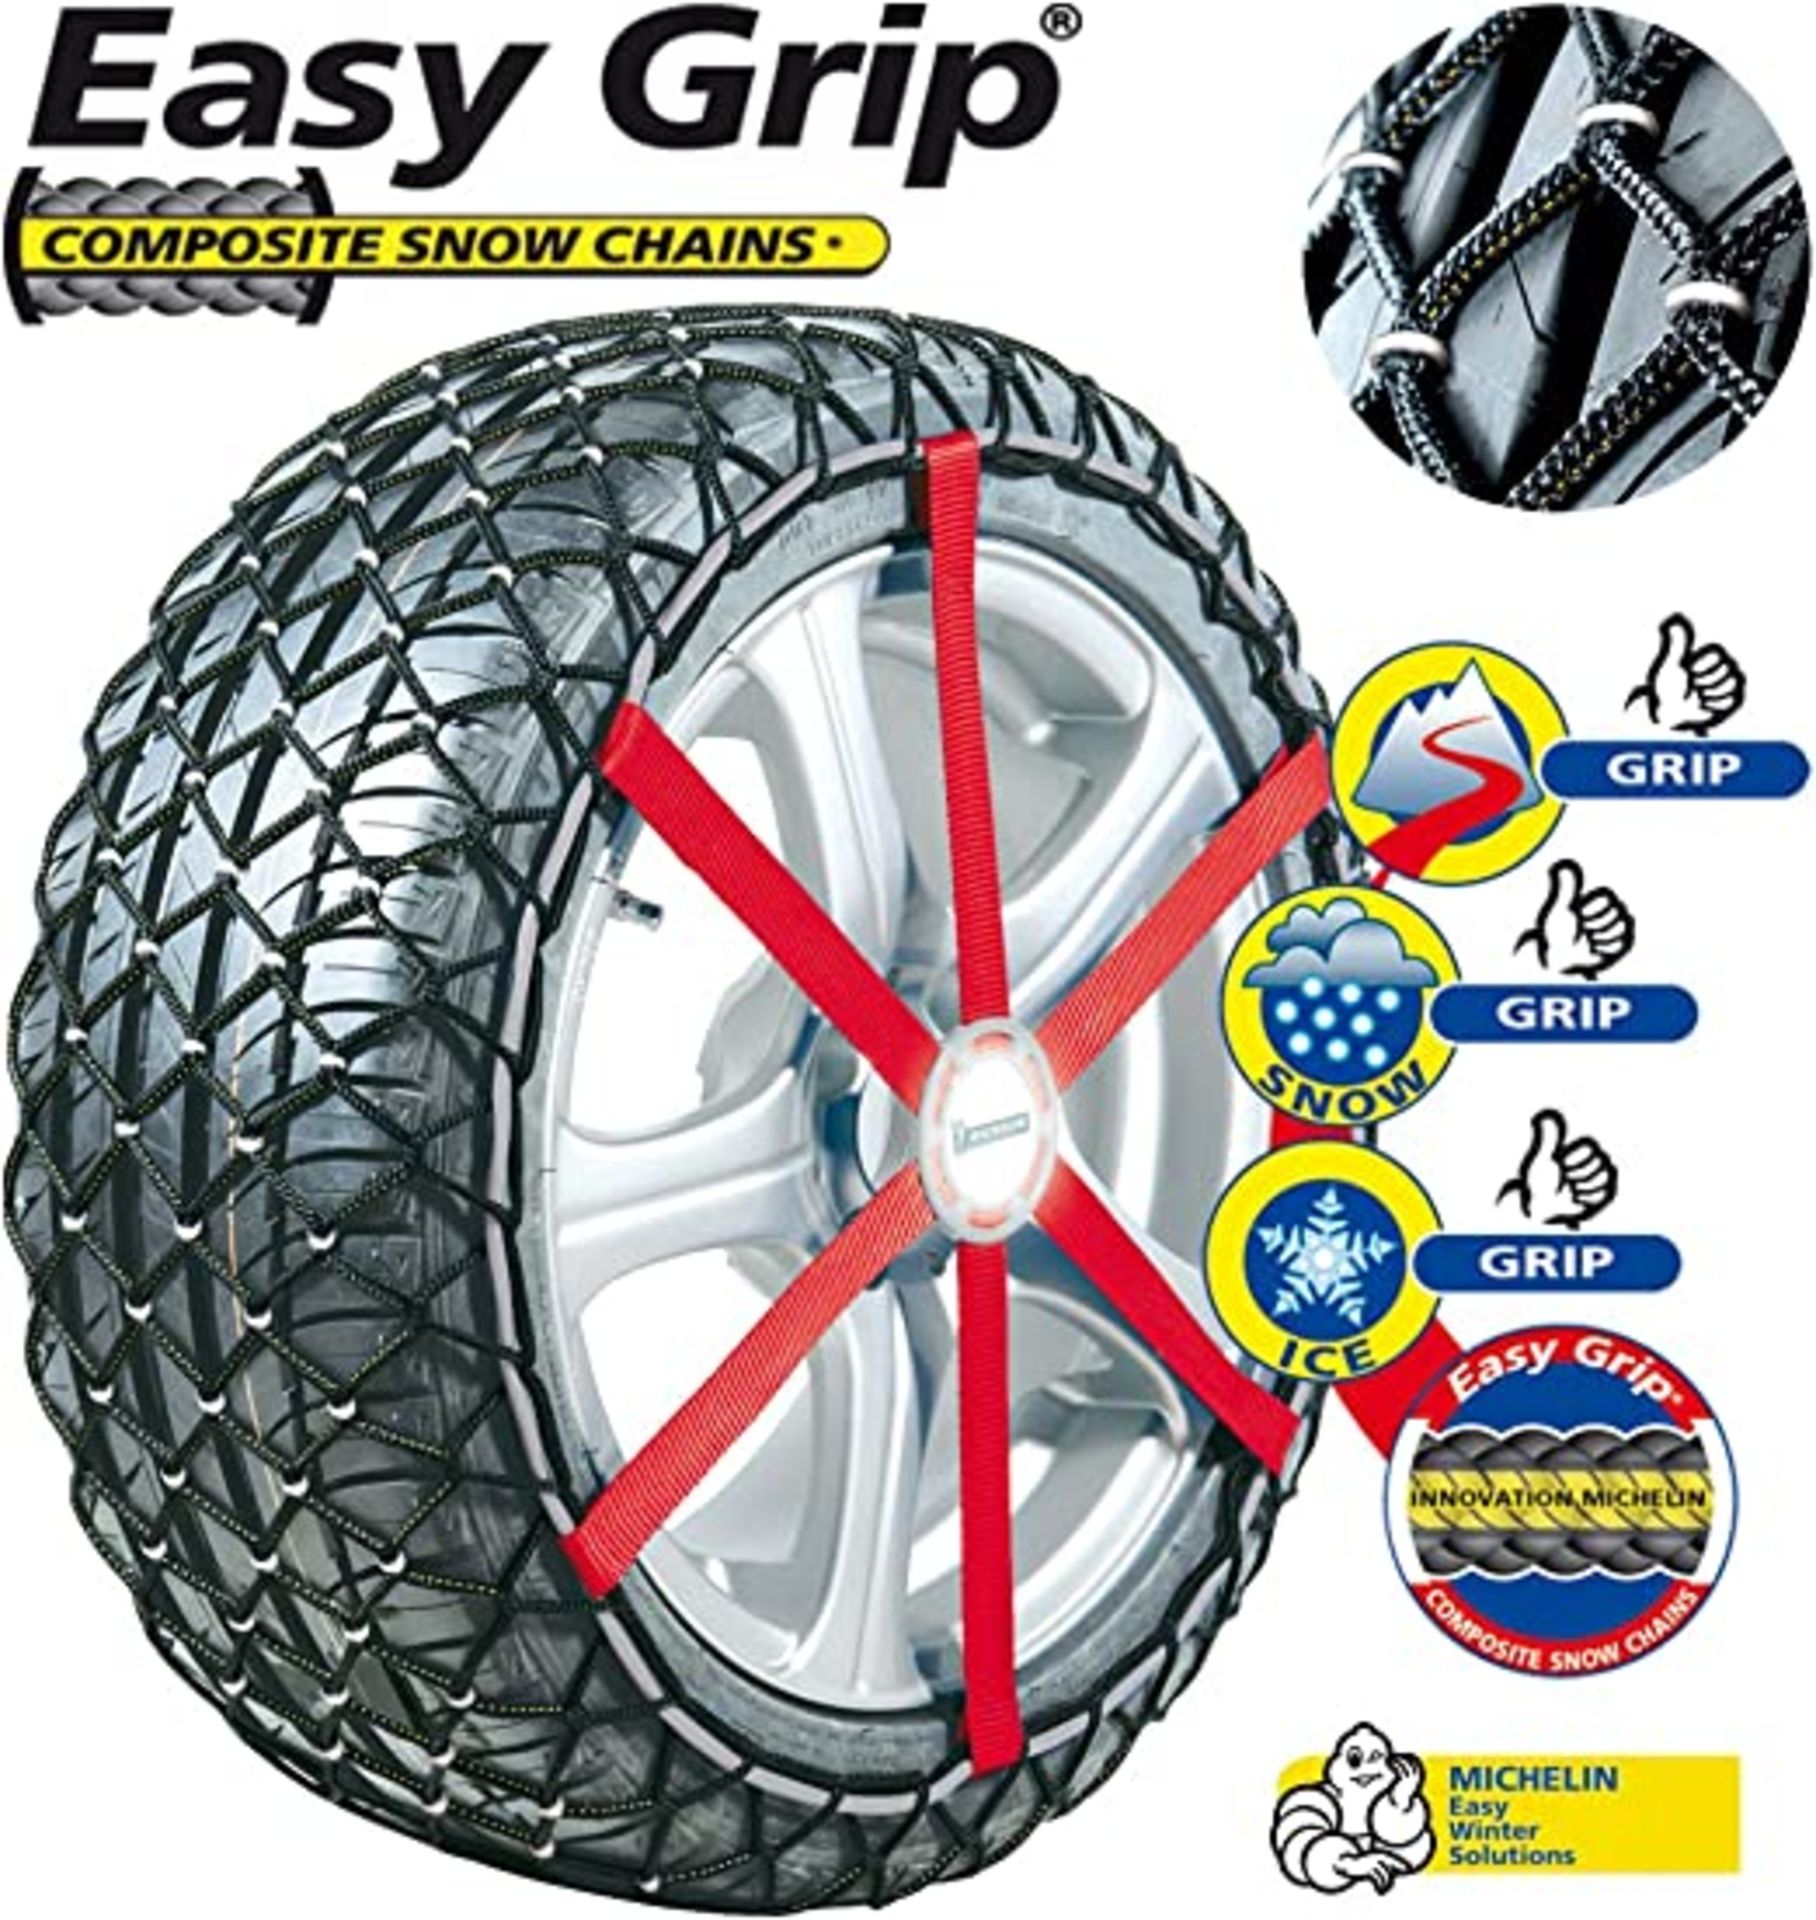 10 X NEW PACKAGED SETS OF Michelin 92302 Textile snow chains Easy Grip J11, ABS and ESP - Image 2 of 3